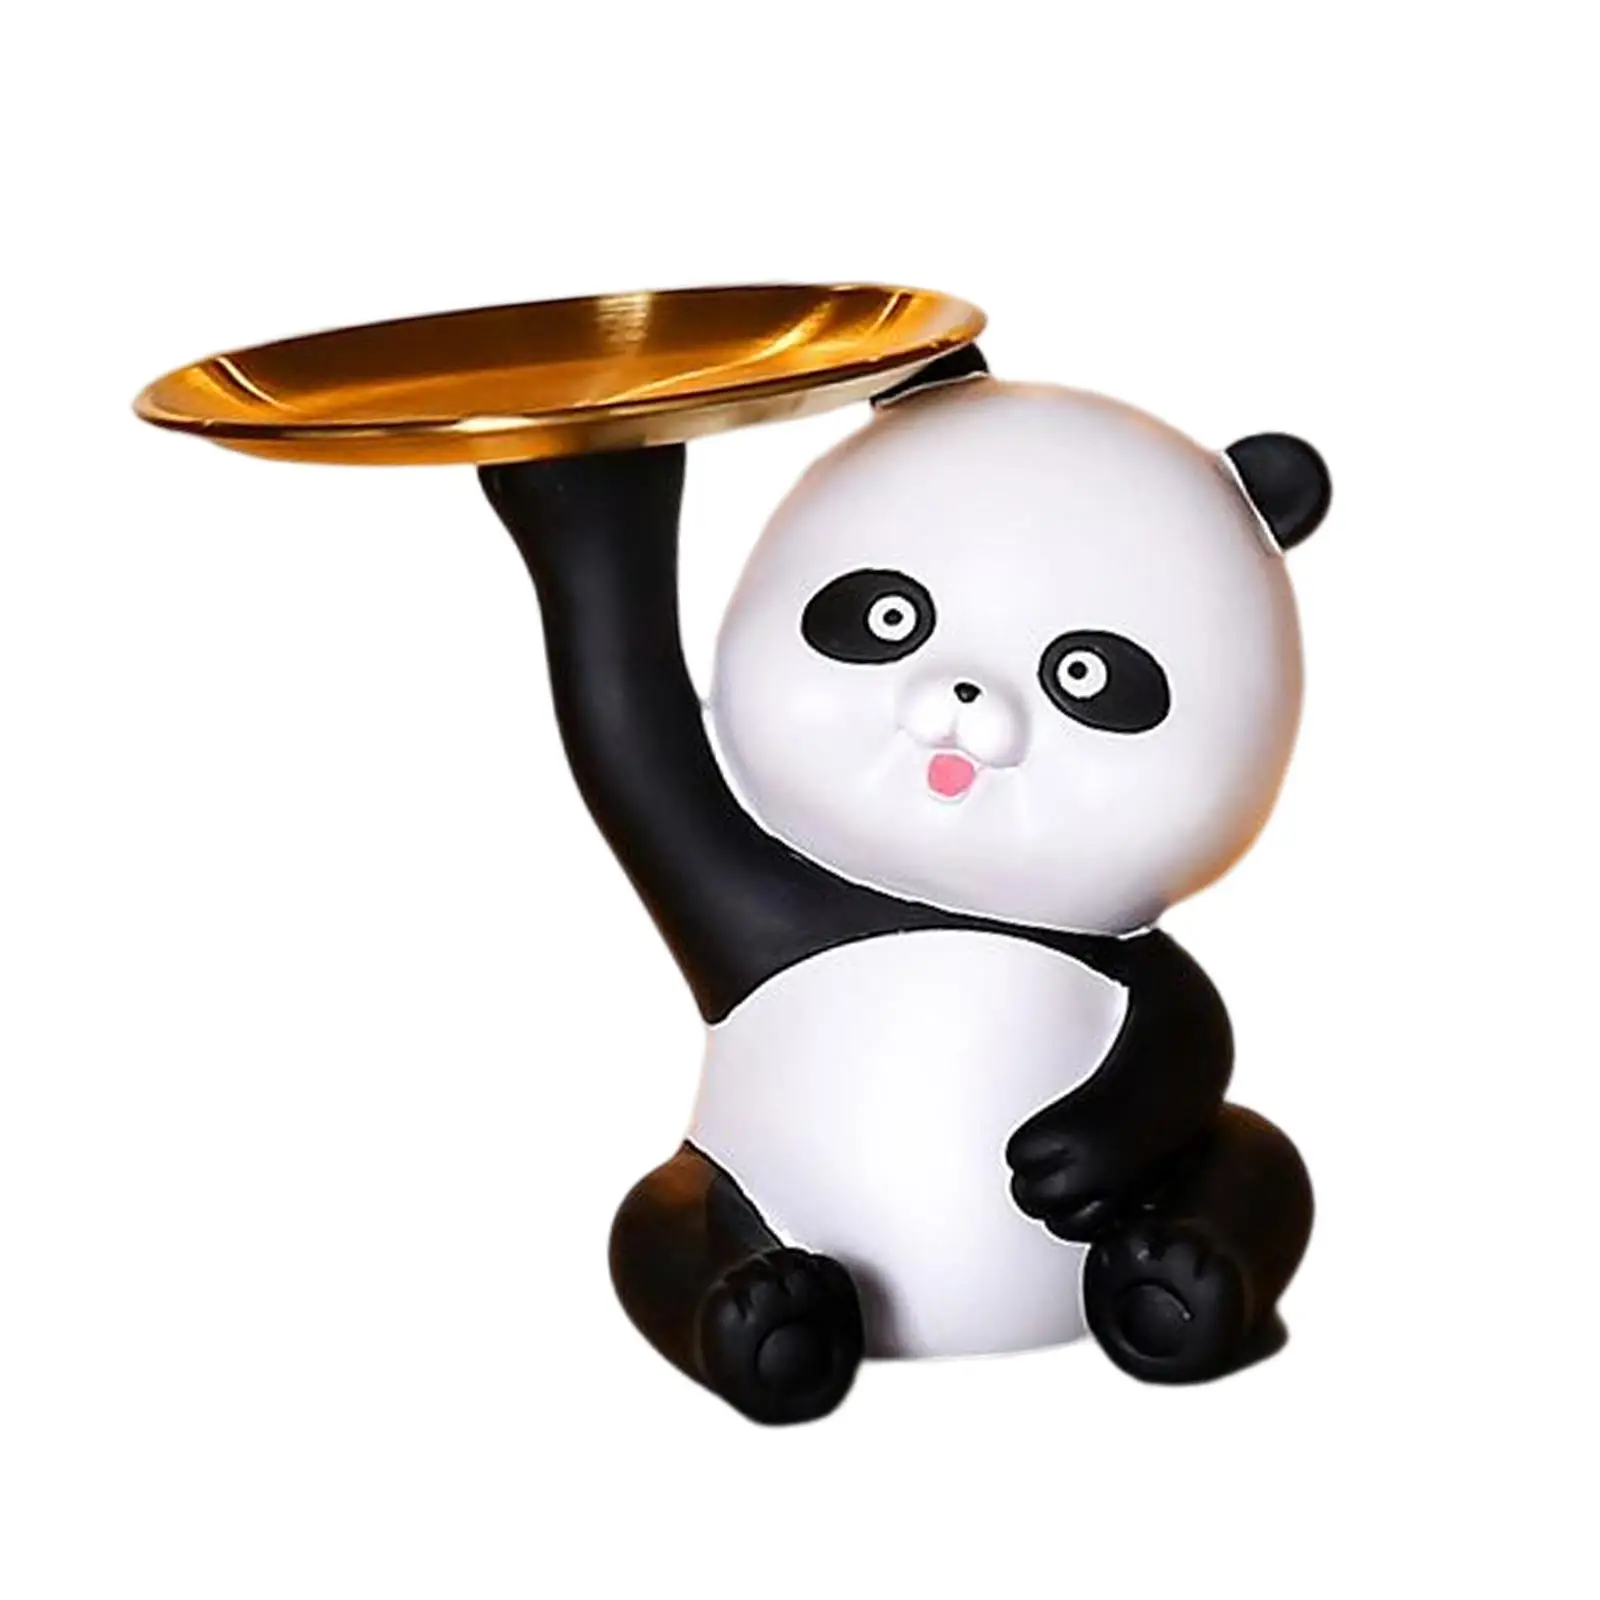 Multifunction Panda Figurine Holding Storage Tray Sundries Container Desk Storage Statue Ornament for Table Desktop Decoration